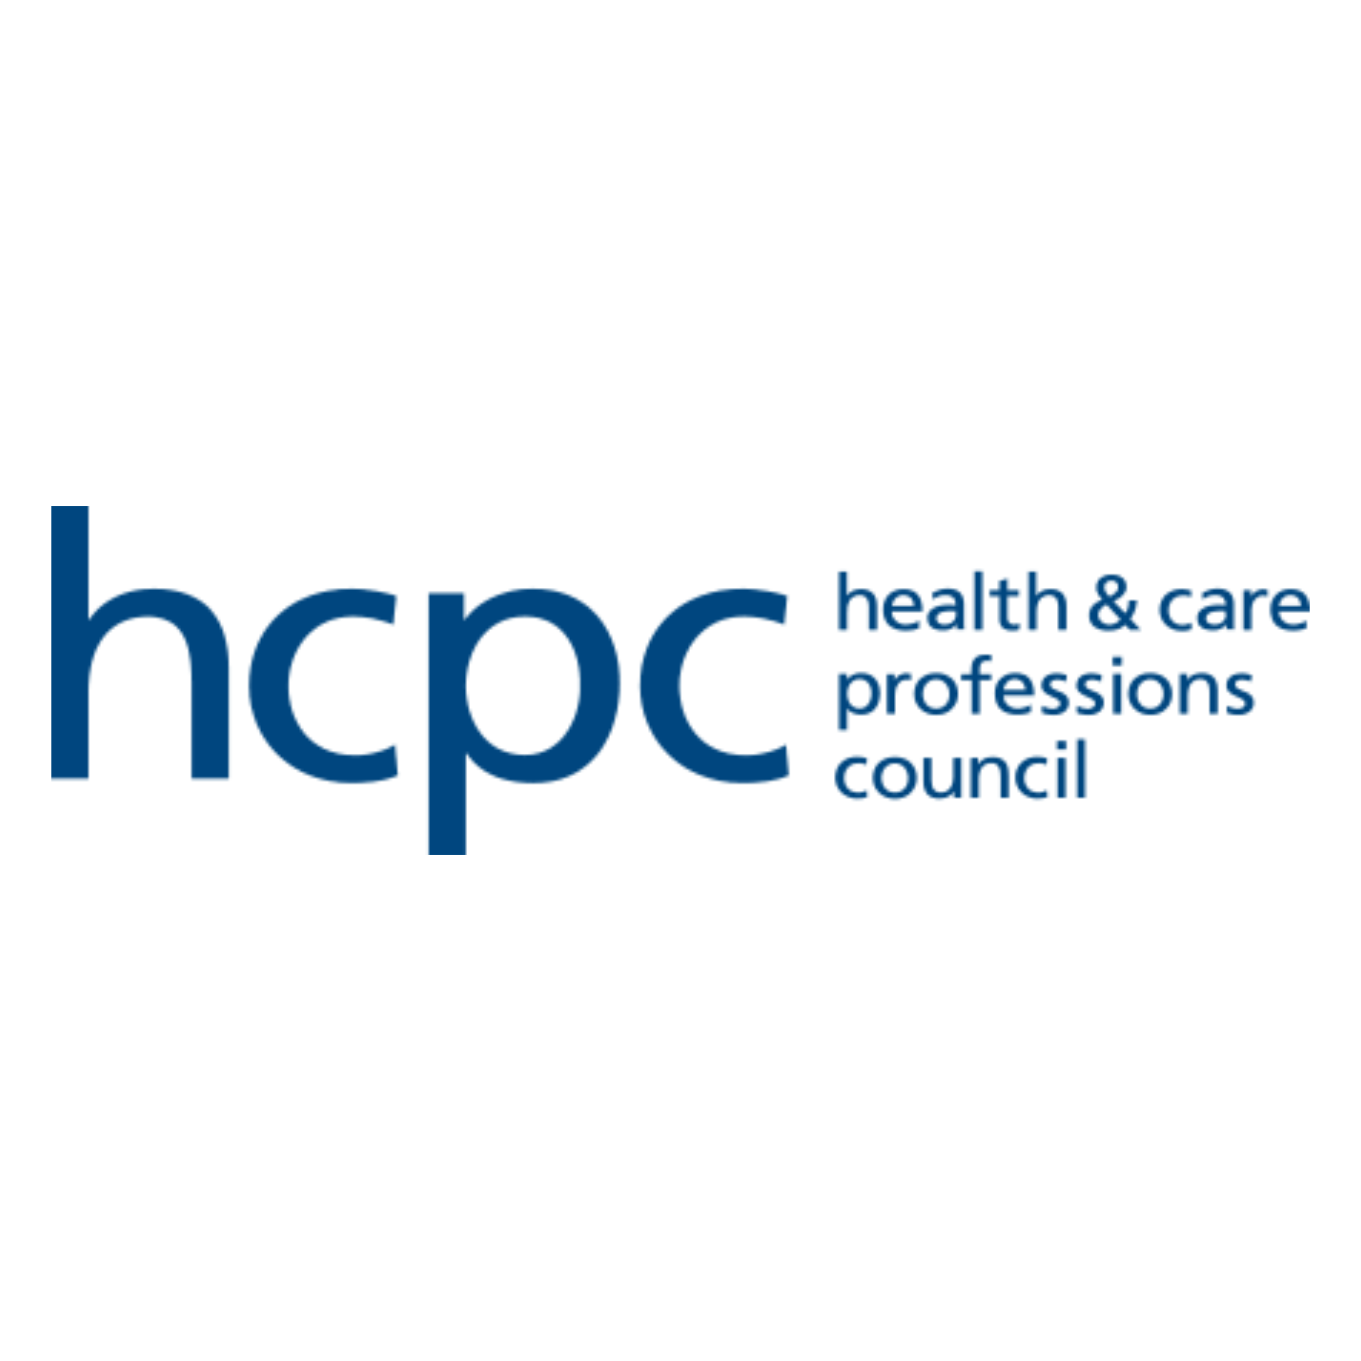 The HSPC Logo - Health & Care Professions Council